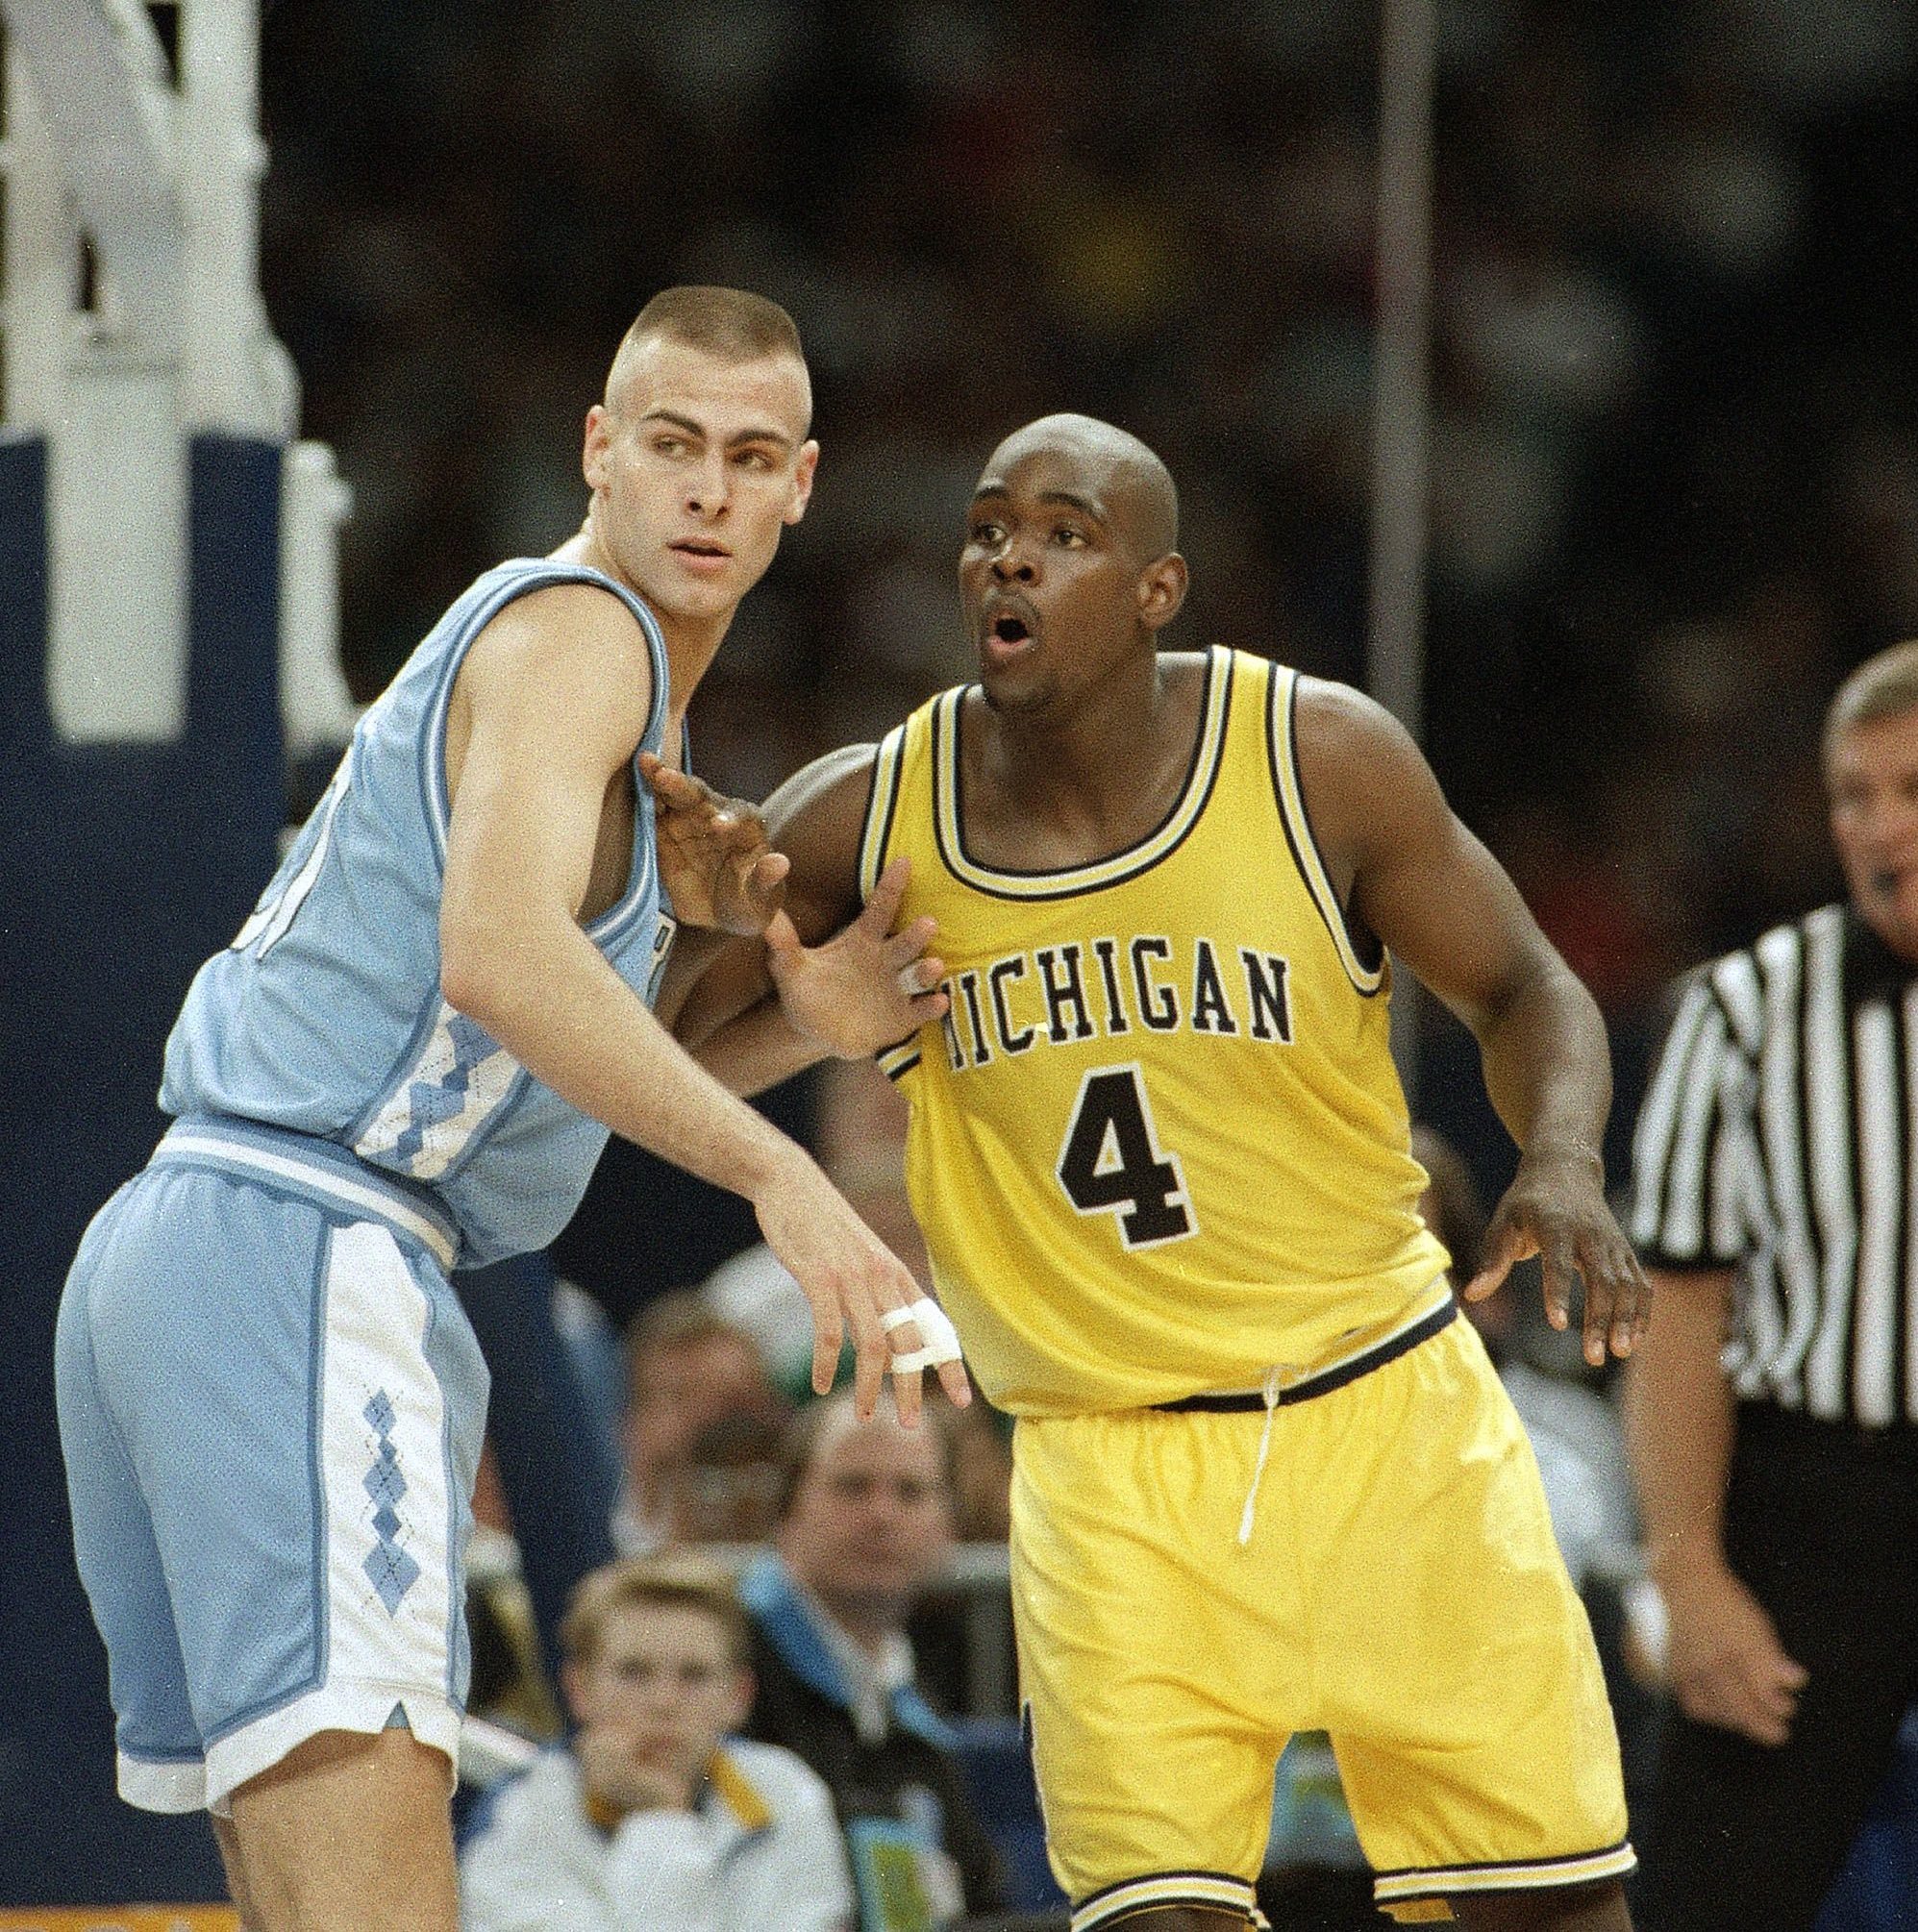 Mandatory Credit: Photo by David Longstreath/AP/Shutterstock (6566326a) Montross Webber North Carolina's Eric Montross, left, guards Michigan's Chris Webber during their Final Four championship game at the Superdome in New Orleans NCAA MONTROSS WEBBER 1993, NEW ORLEANS, USA